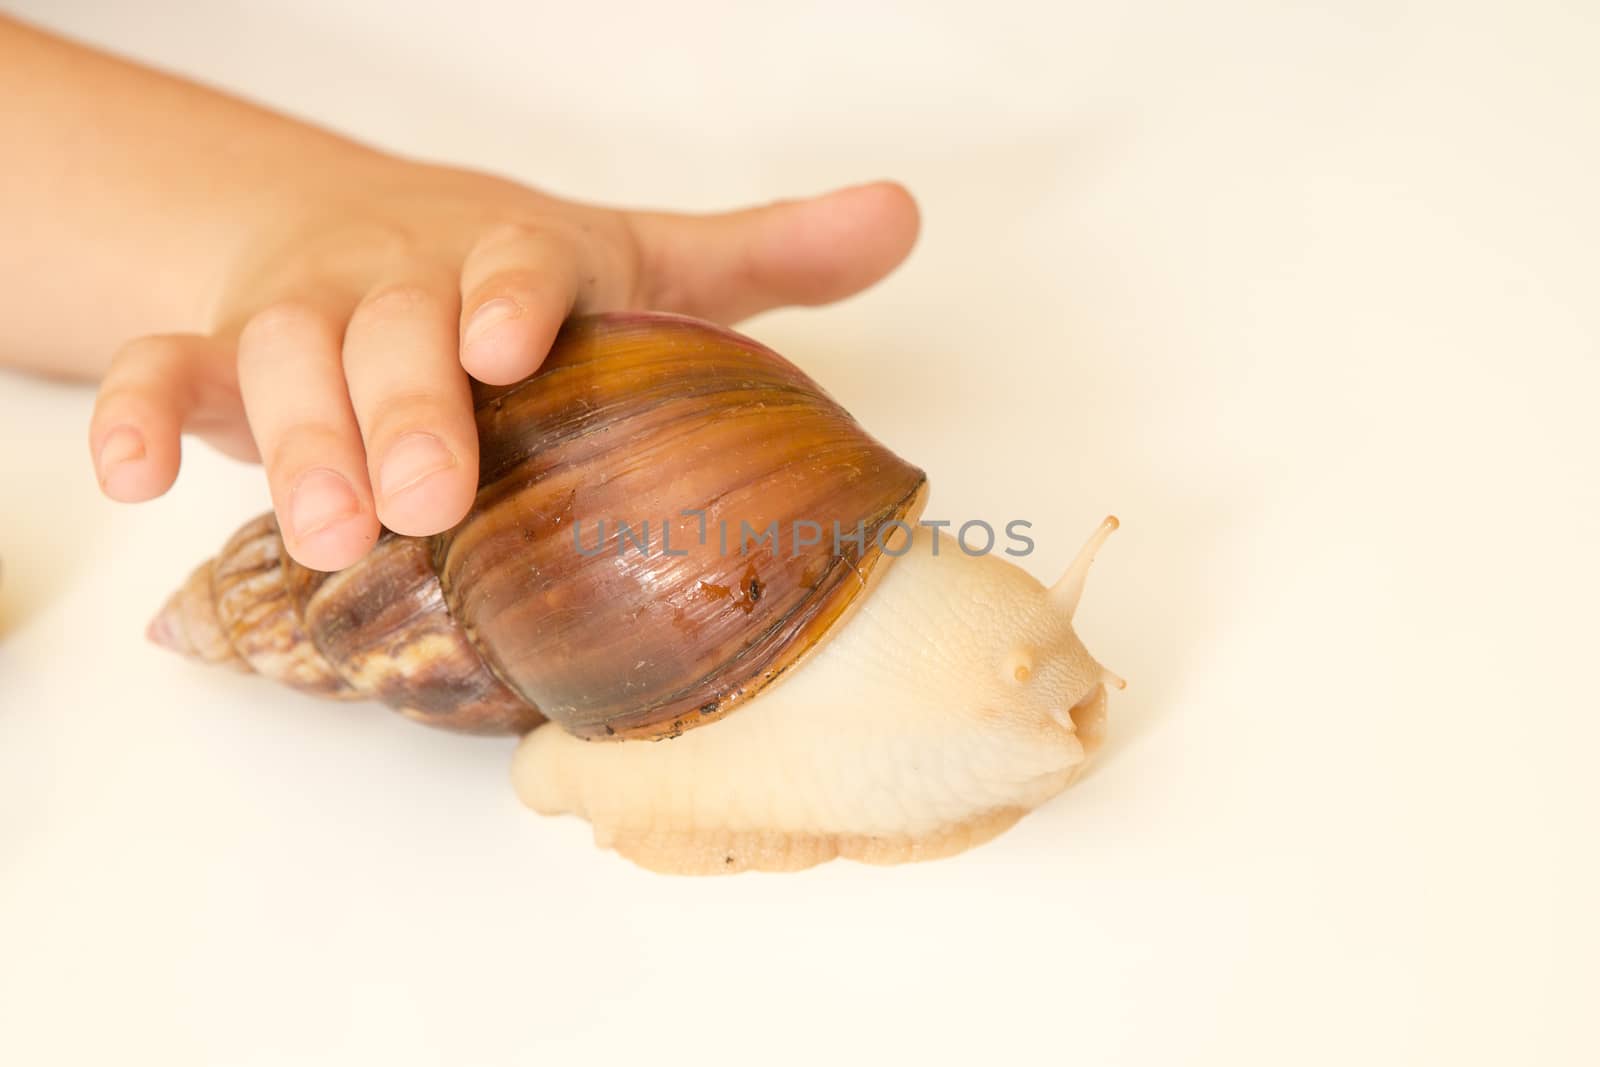 African Achatina snail in hand at home, close up by olgagordeeva